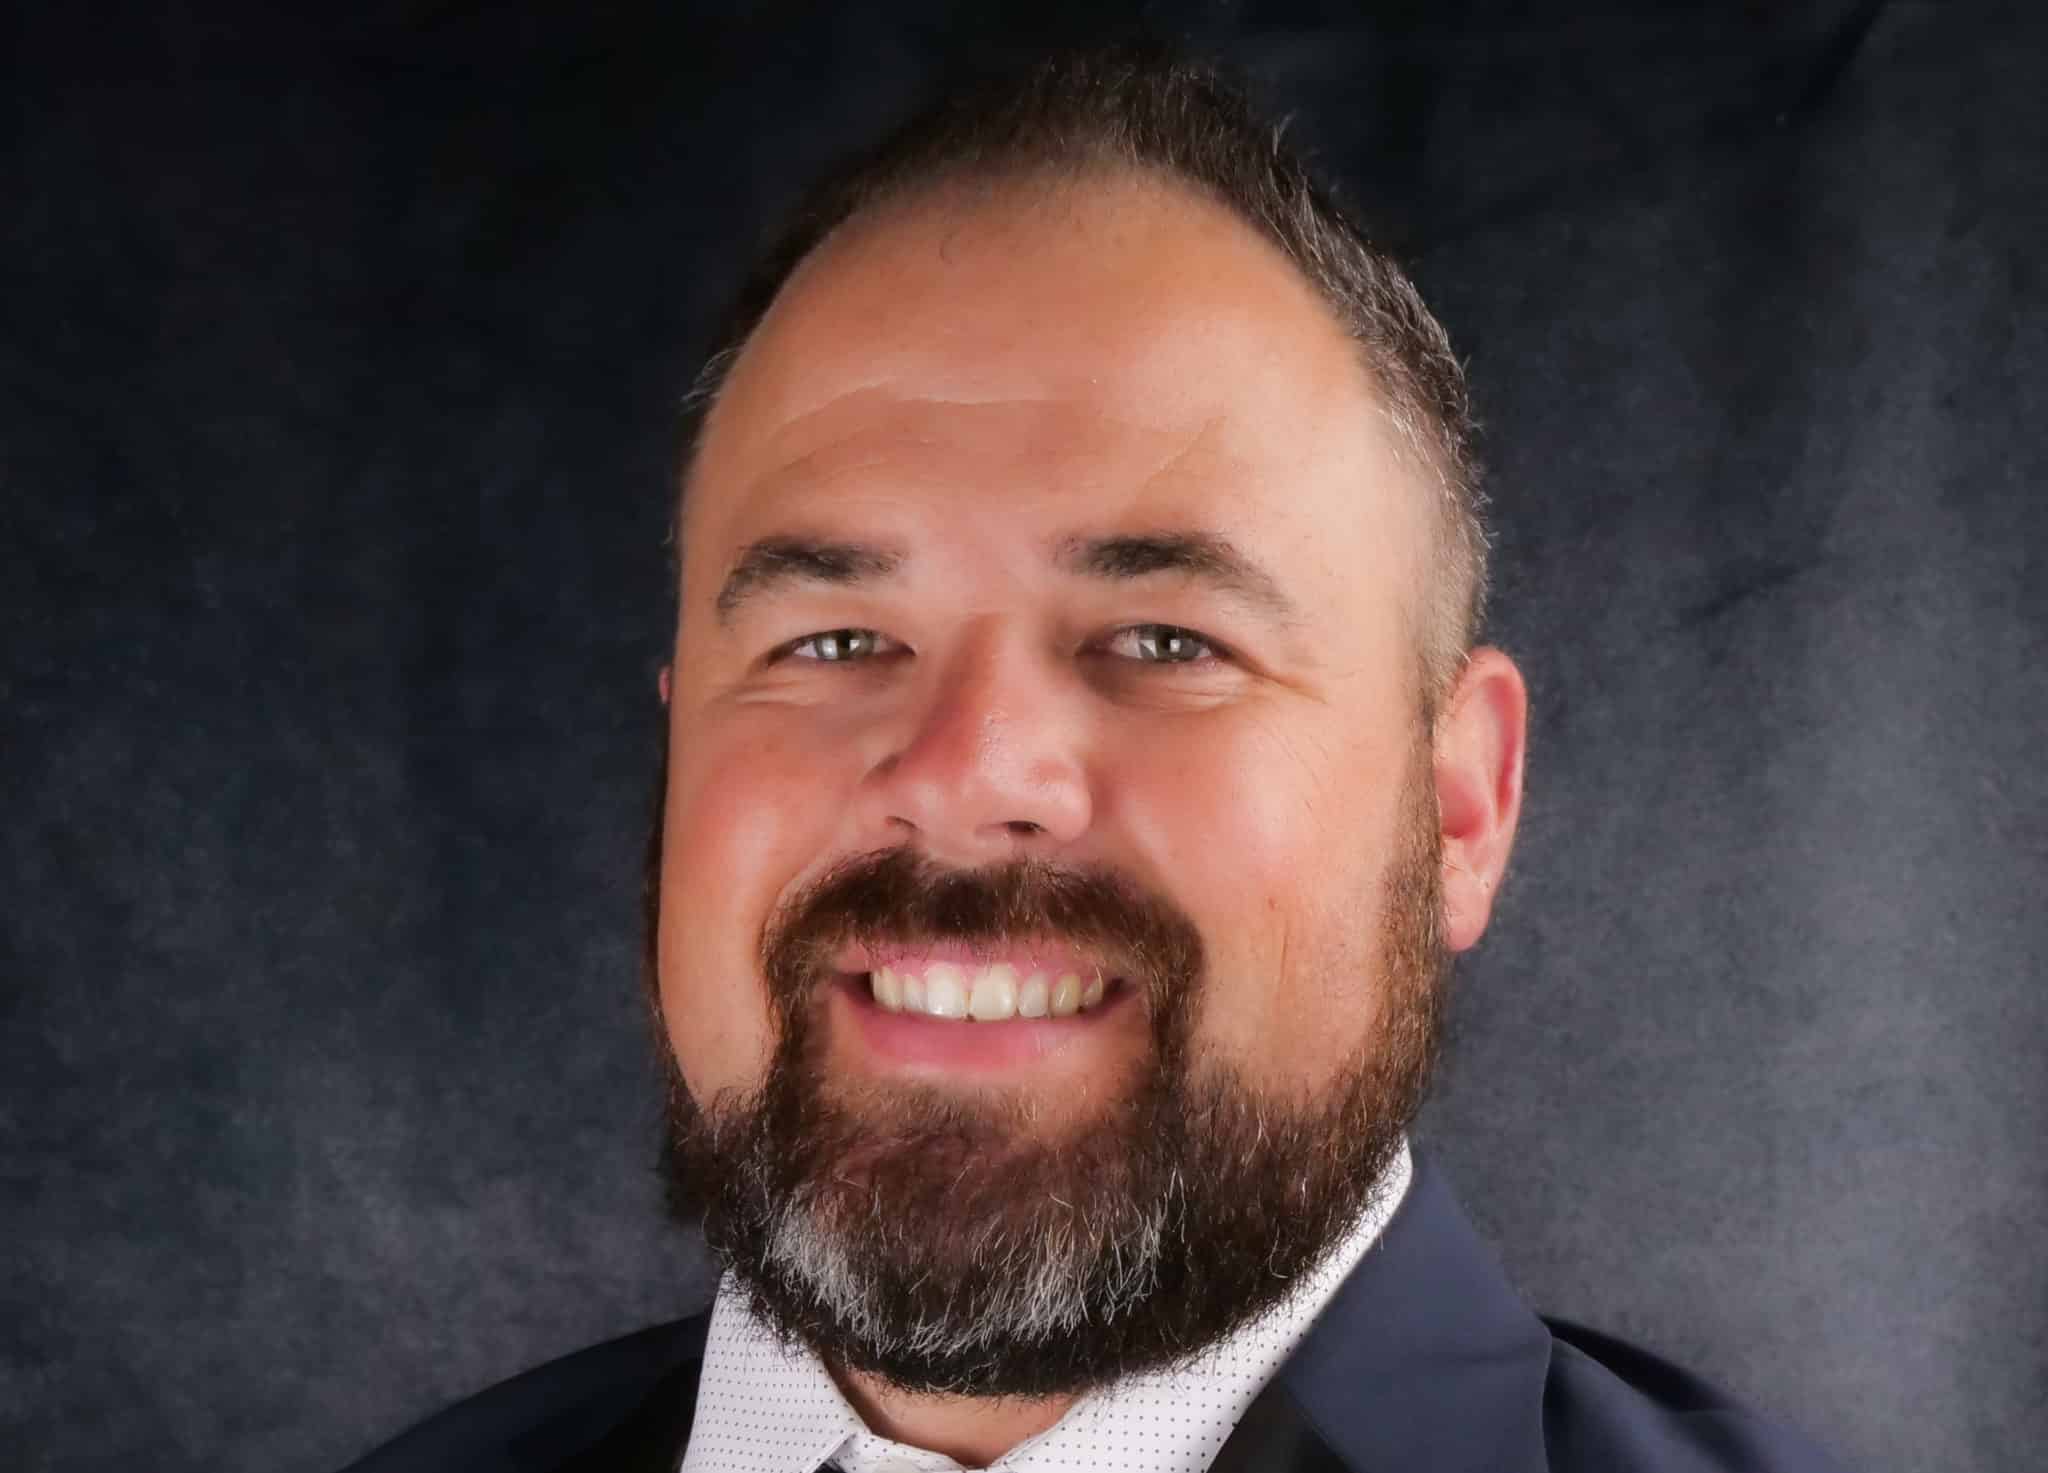 Trey Spath Joins SJE as Regional Sales Manager for the Northwest